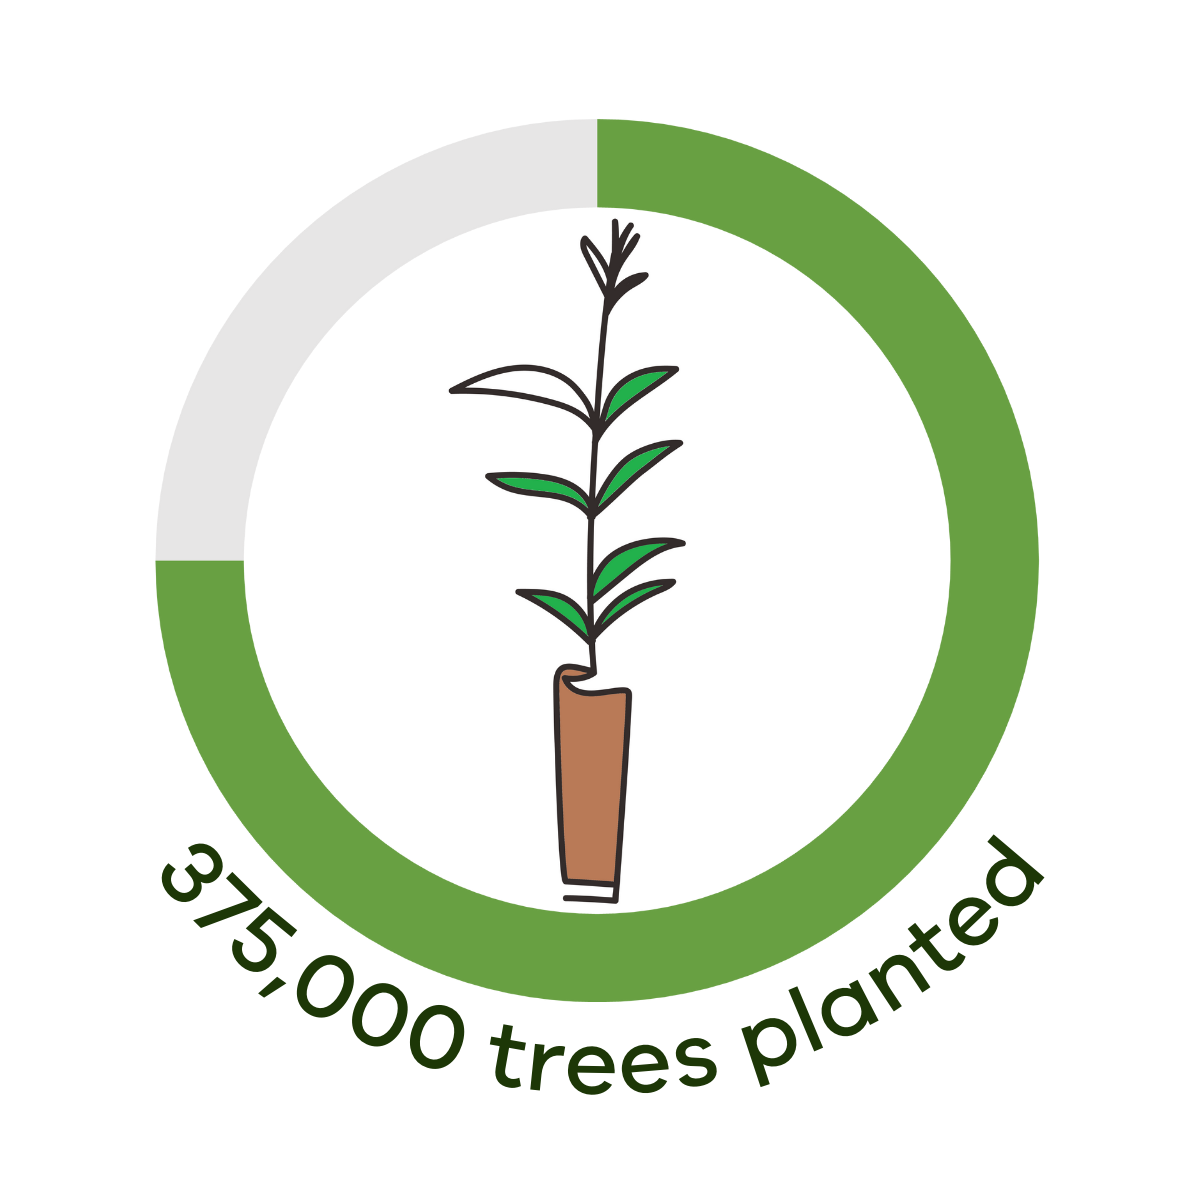 Graph displaying number of trees planted as part of the program. Graph shows progress of 375000 of the 500000 target